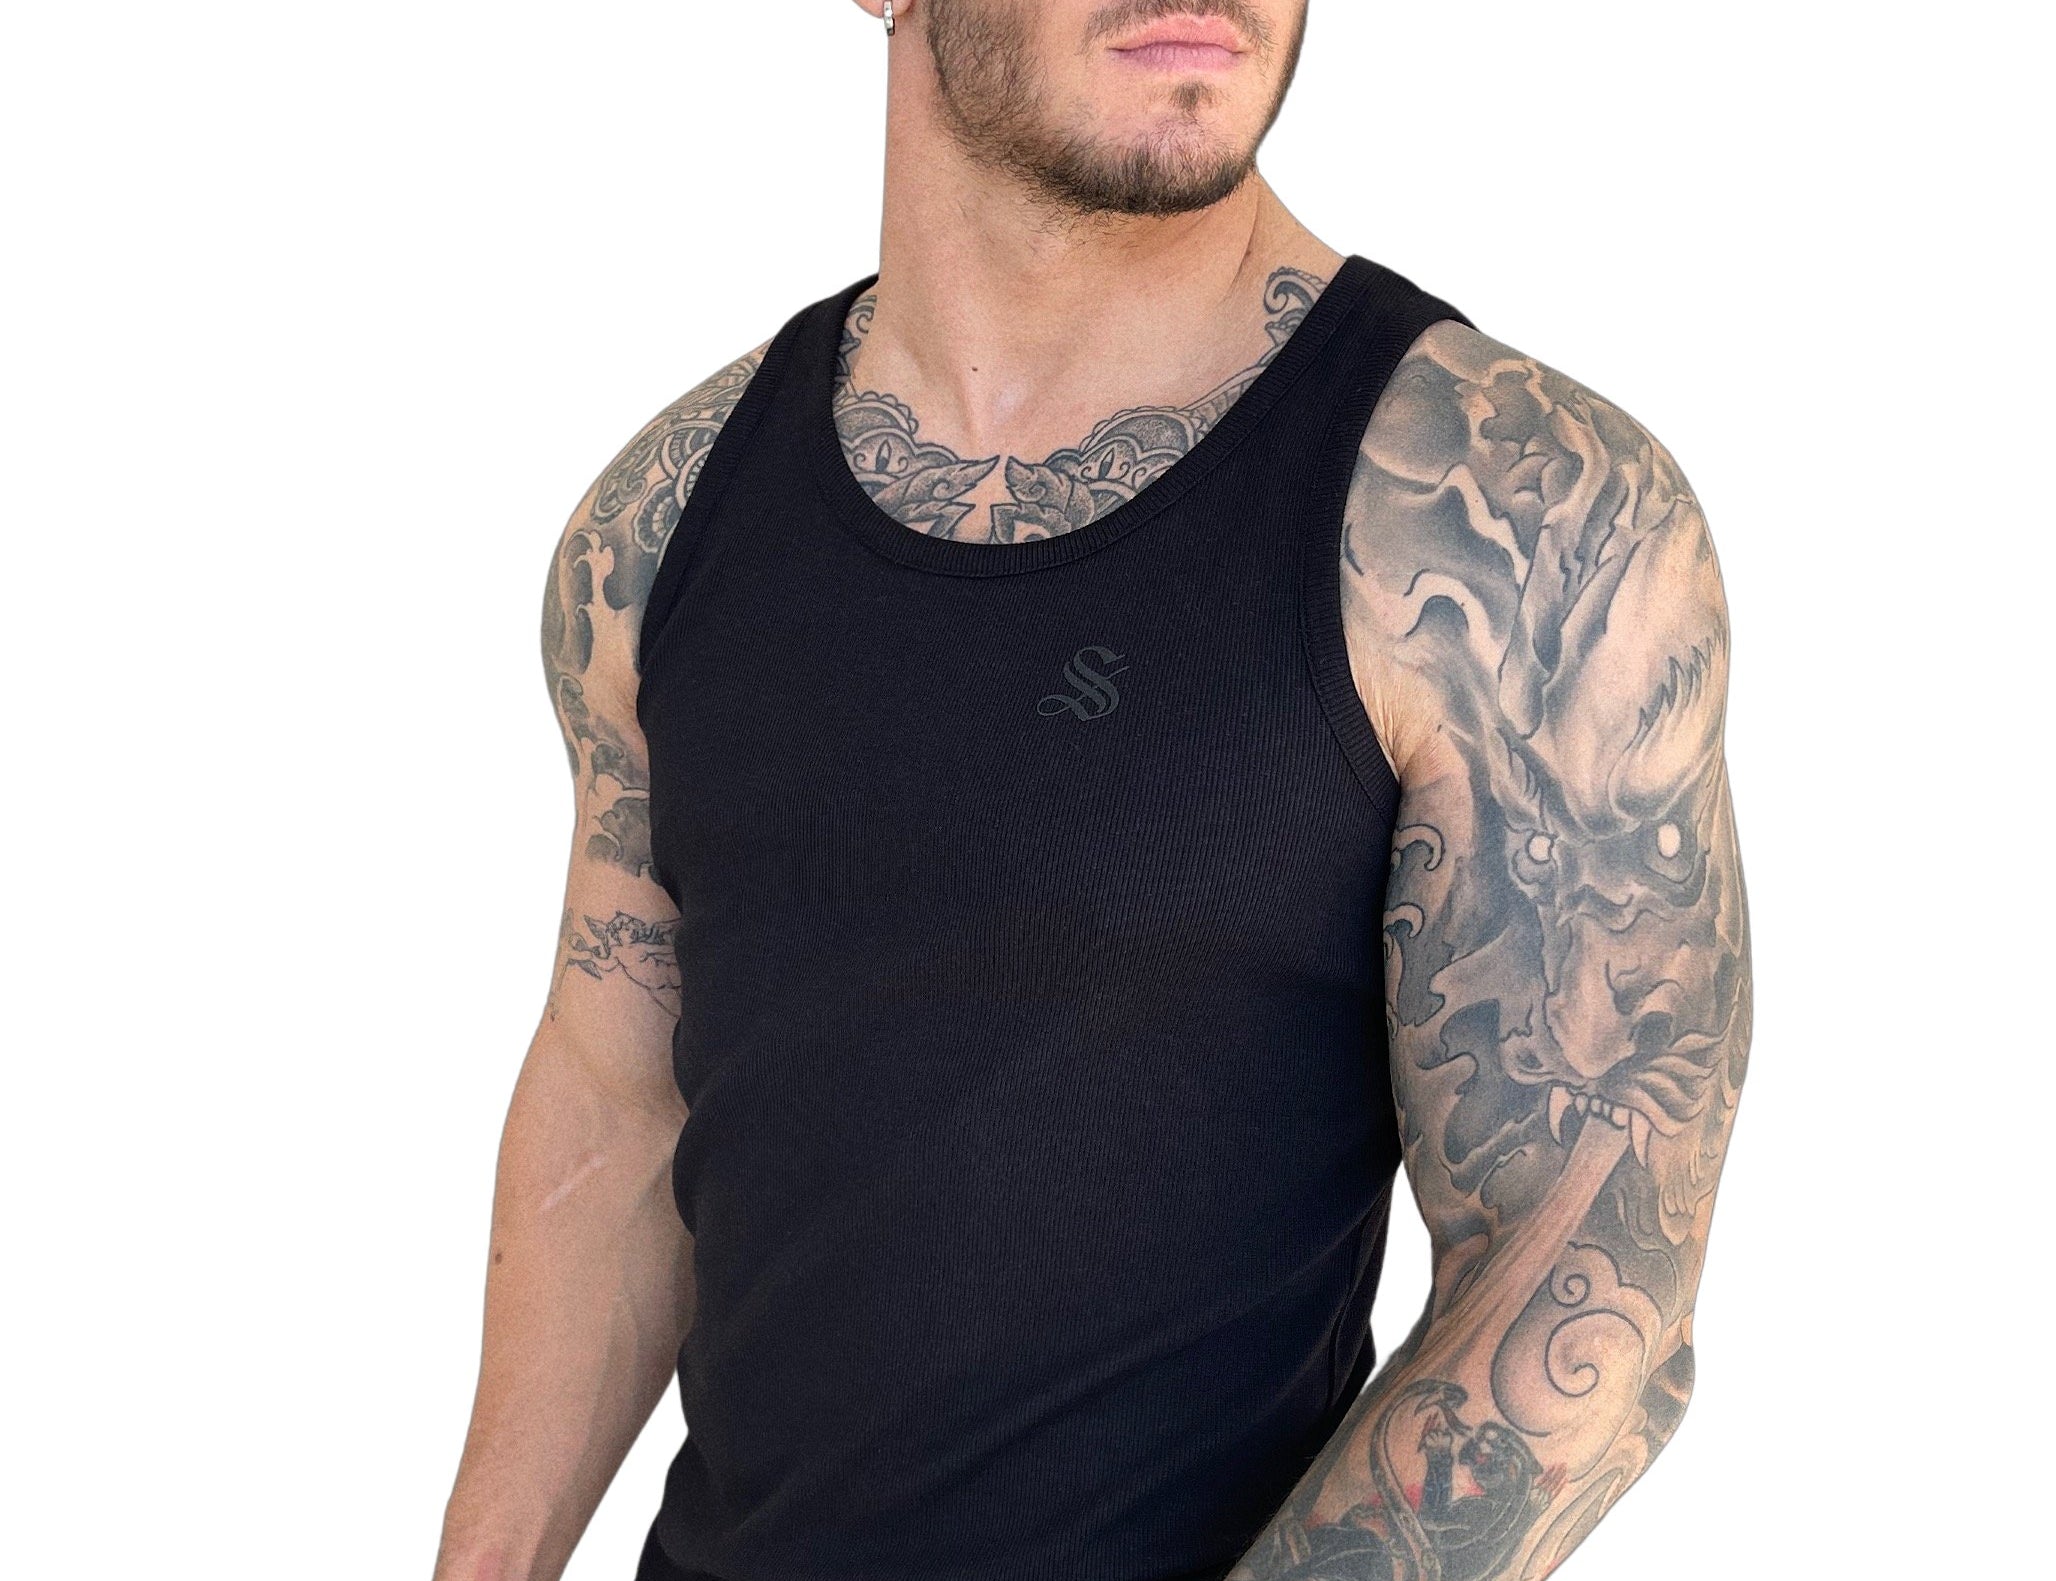 Jack - Black Tank Top for Men - Sarman Fashion - Wholesale Clothing Fashion Brand for Men from Canada